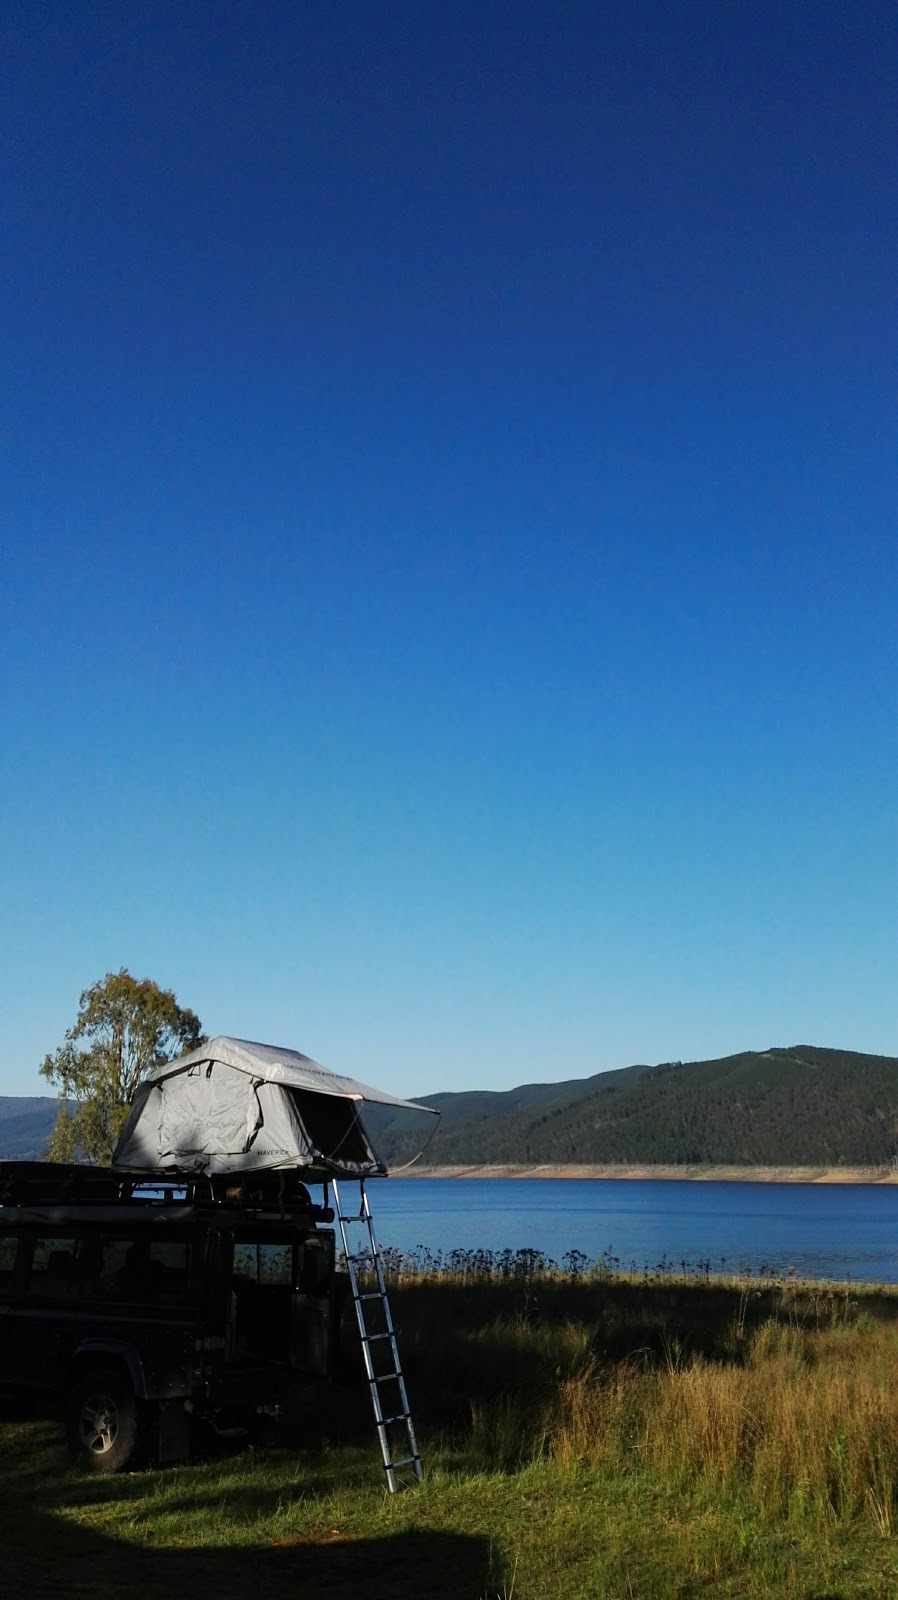 Humes Crossing campground | campground | Humes Crossing Access, Blowering NSW 2720, Australia | 0269477025 OR +61 2 6947 7025